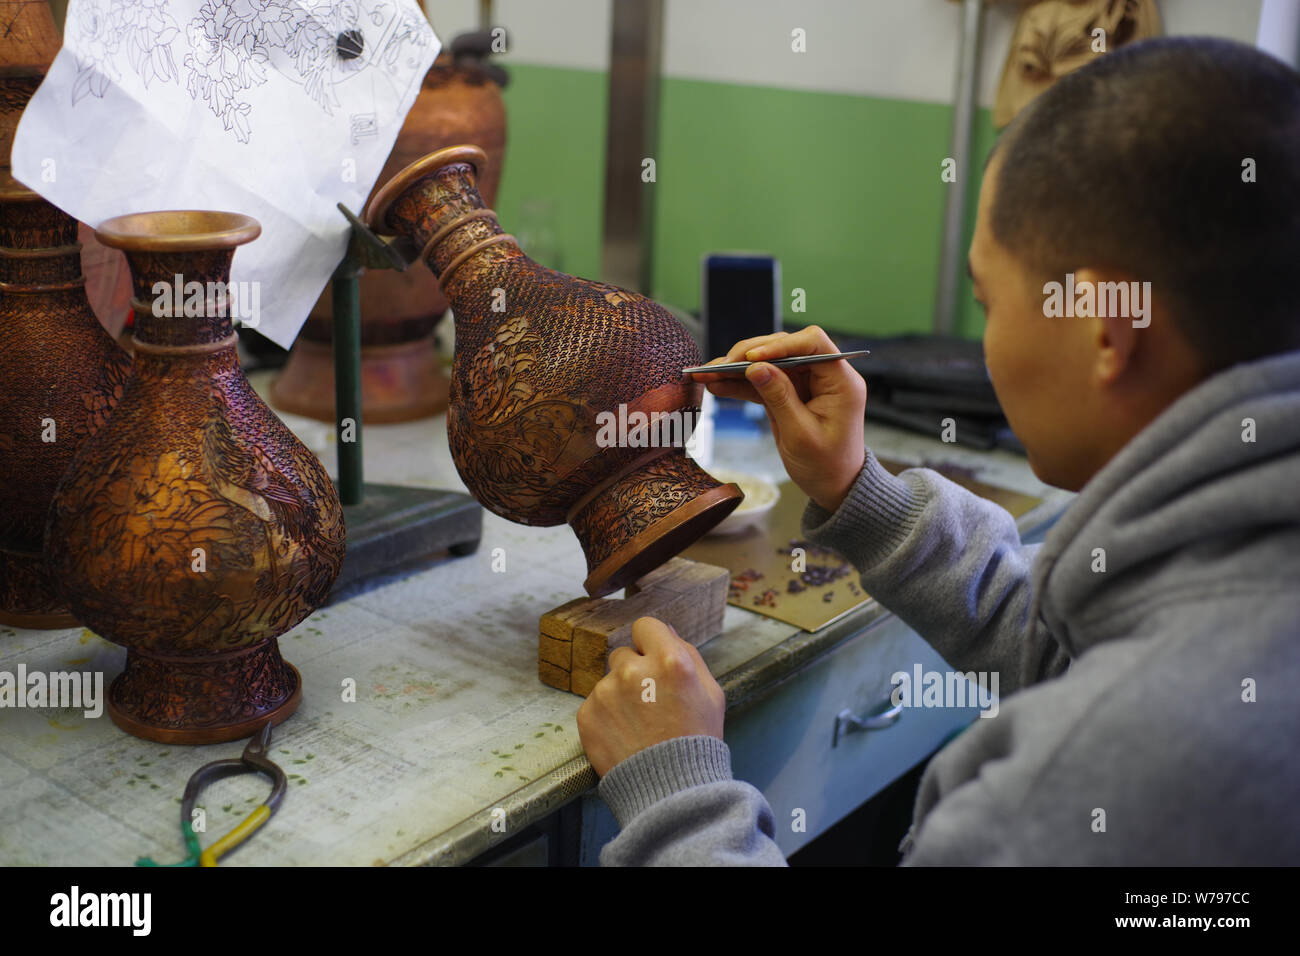 A Chinese worker adds cloisons according to the pattern previously transferred to a cloisonne artwork in the biggest cloisonne factory, Beijing Enamel Stock Photo